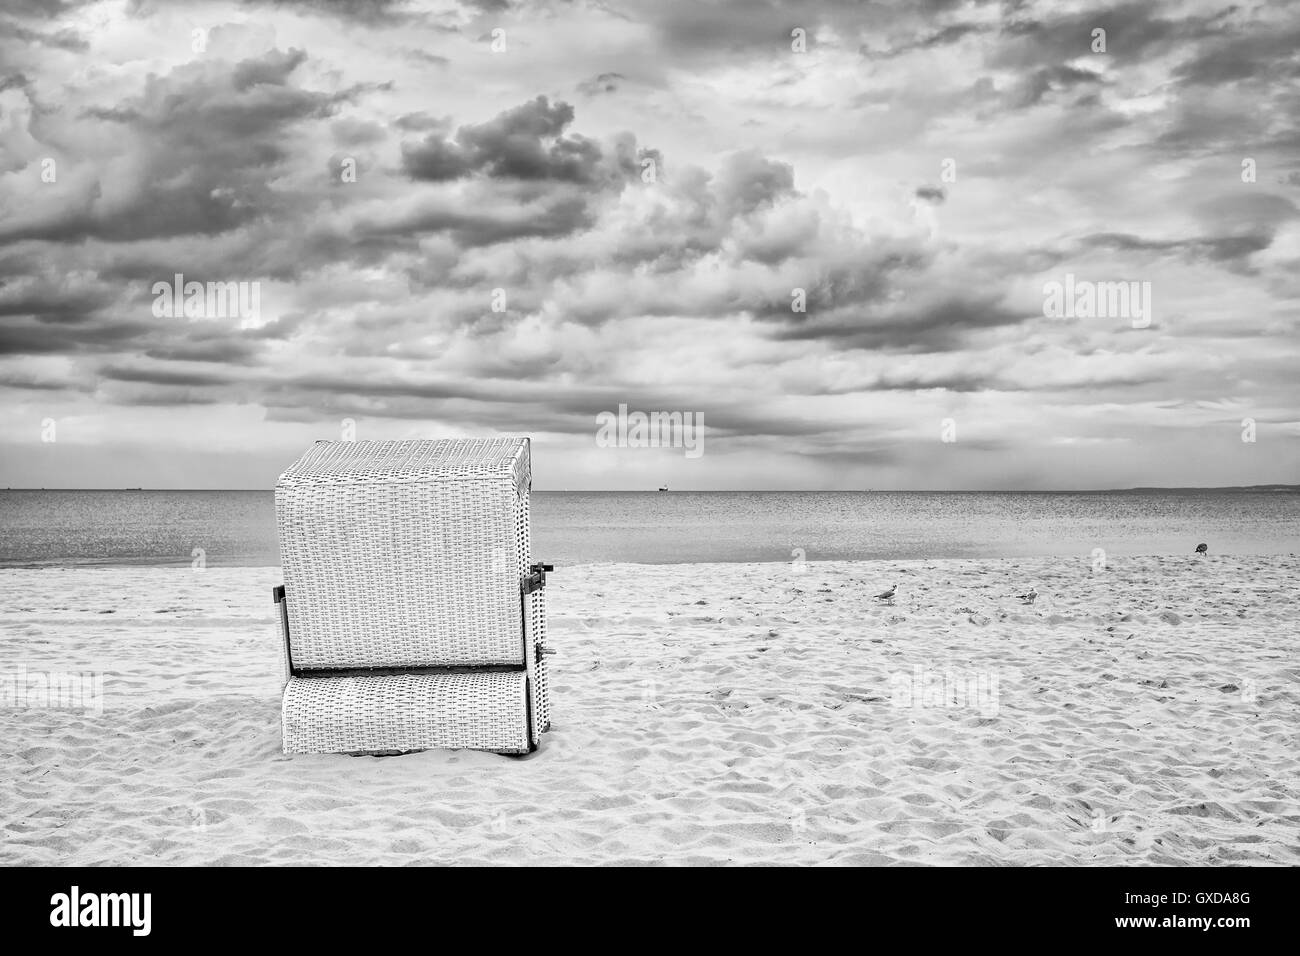 Hooded wicker basket chair on an empty beach, black and white filter applied. Stock Photo